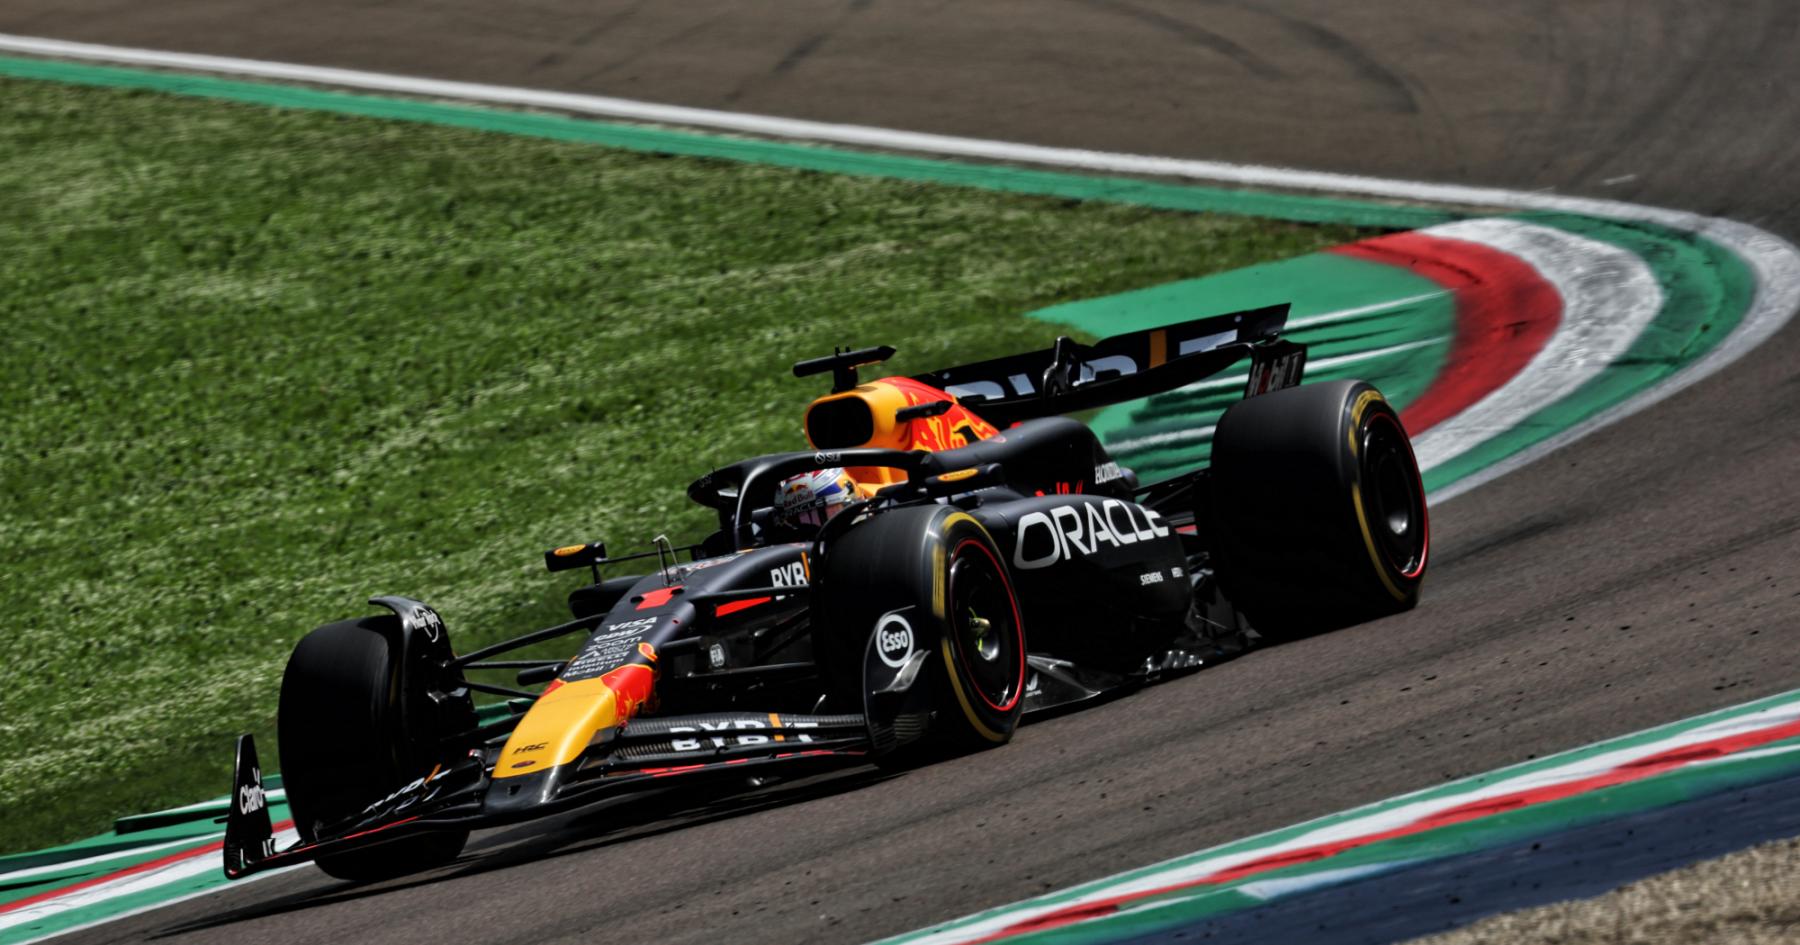 Verstappen: 'I almost crashed into a grandstand' in Imola win